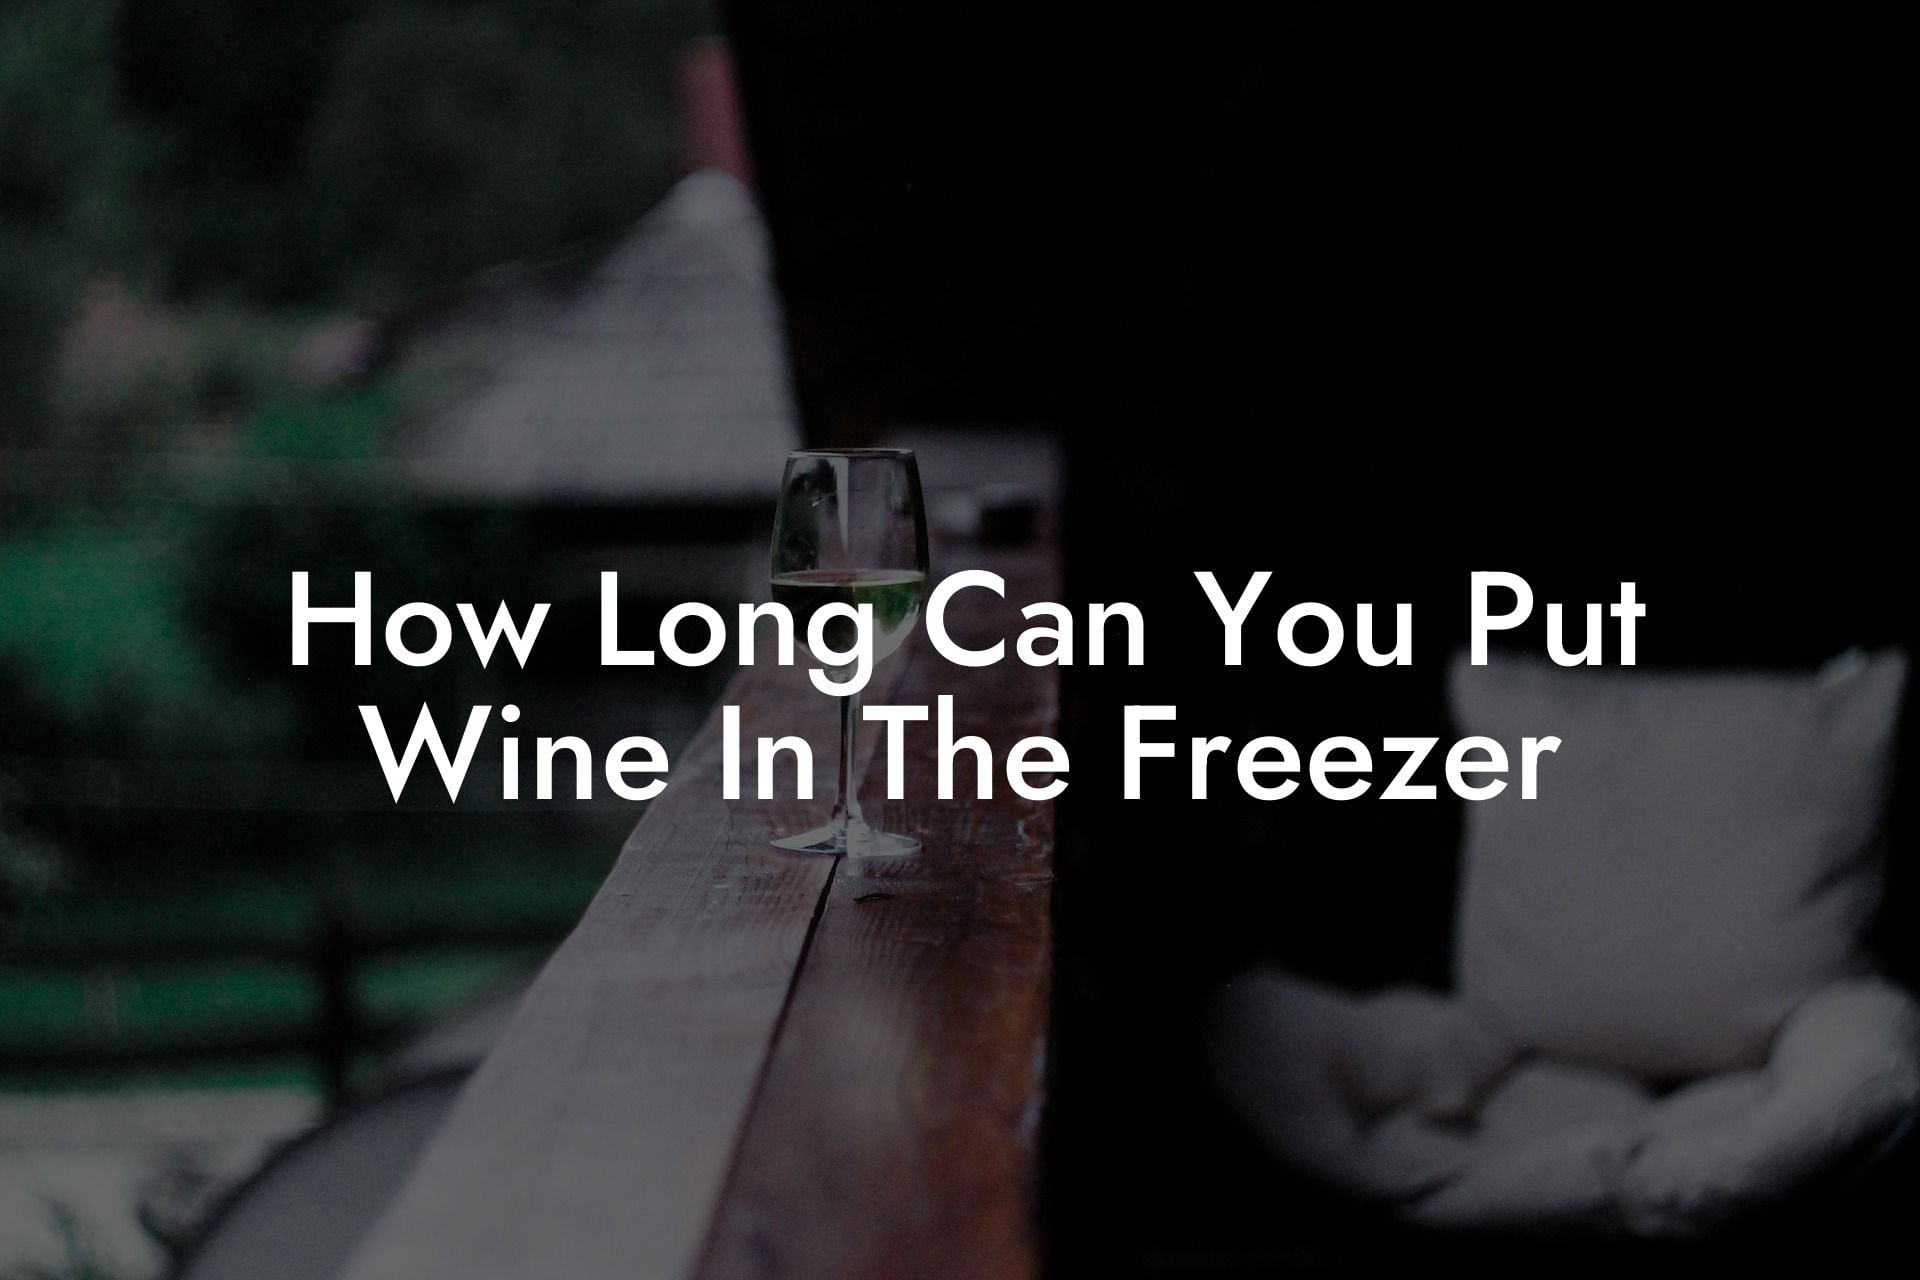 How Long Can You Put Wine In The Freezer